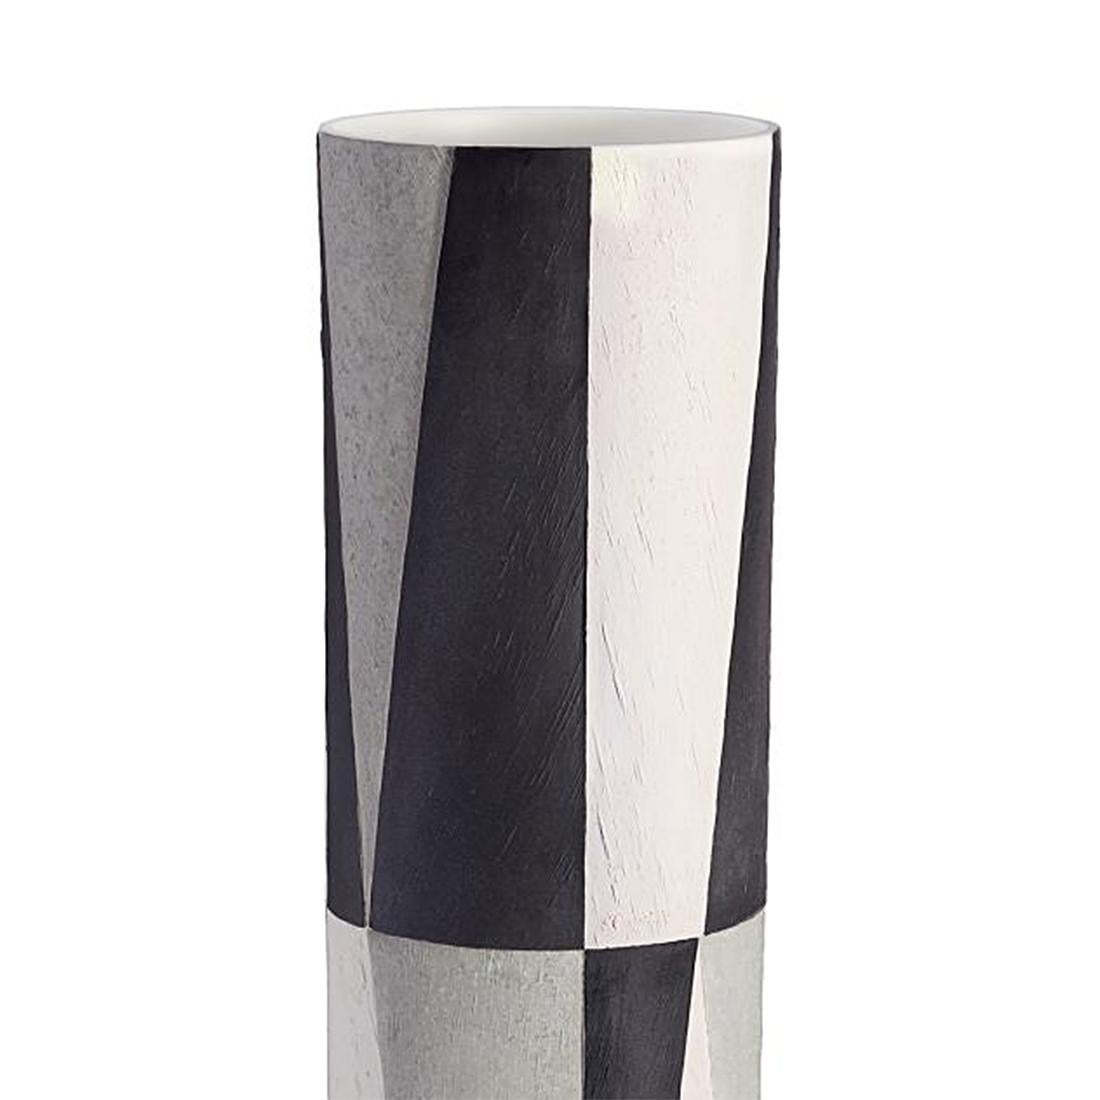 Vase Theo in earthenware.
Also available in table lamp Theo
and floor lamp Theo.